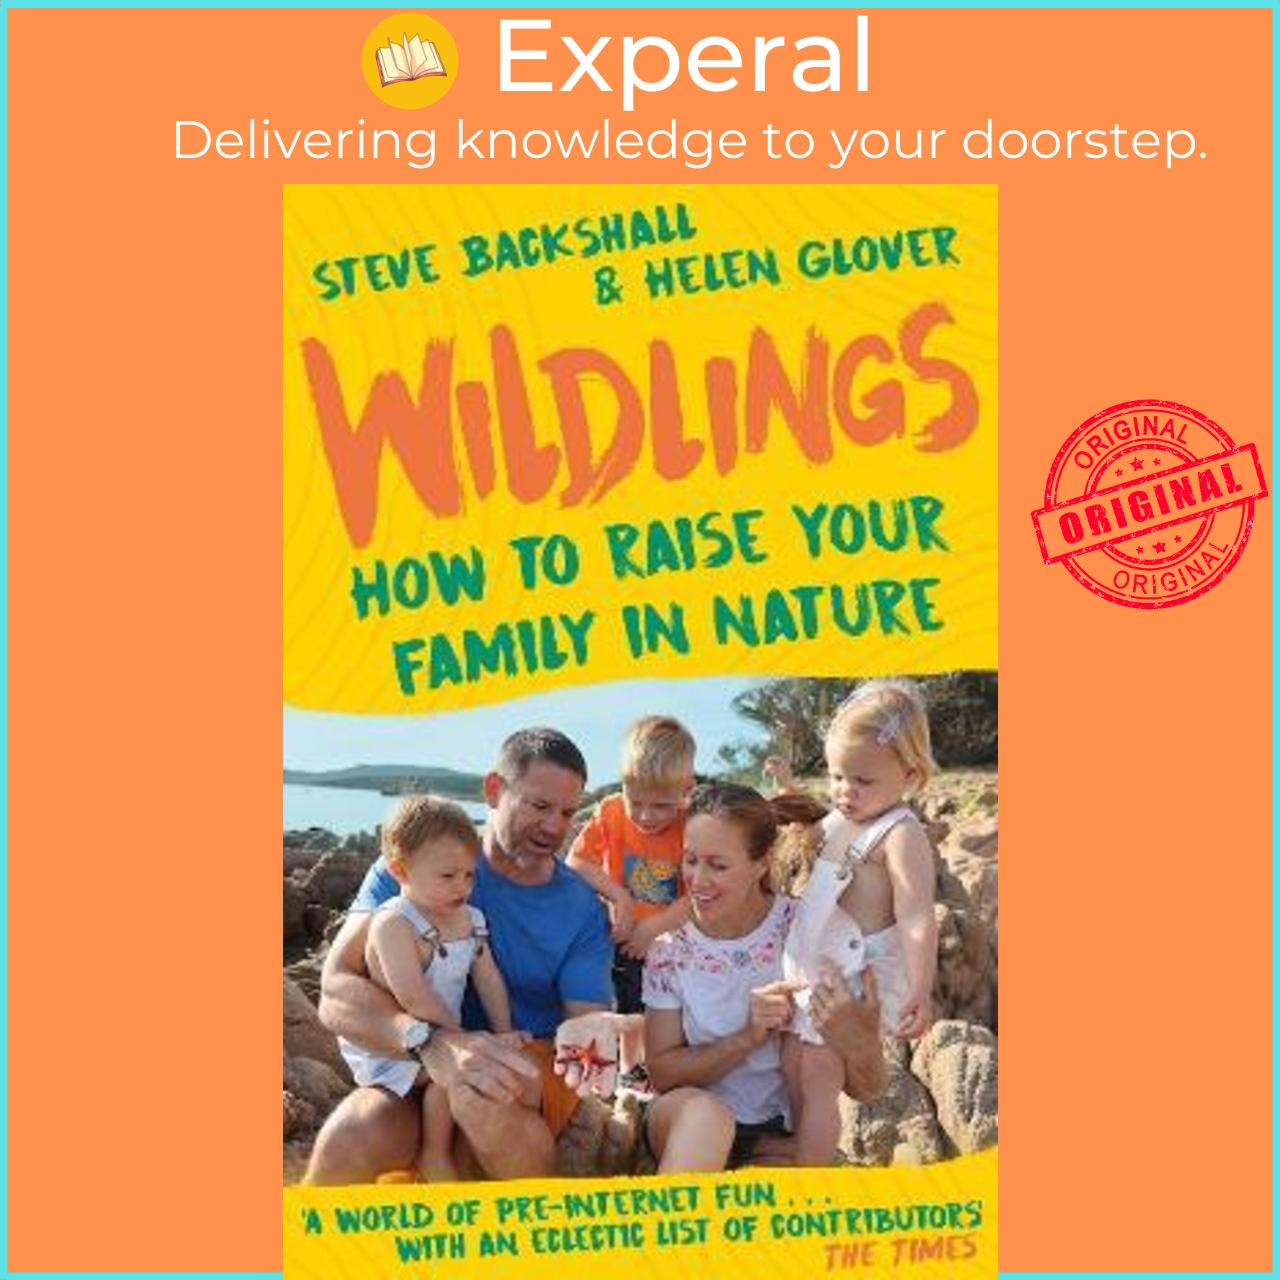 Sách - Wildlings : How to raise your family in nature by Steve Backshall (UK edition, paperback)